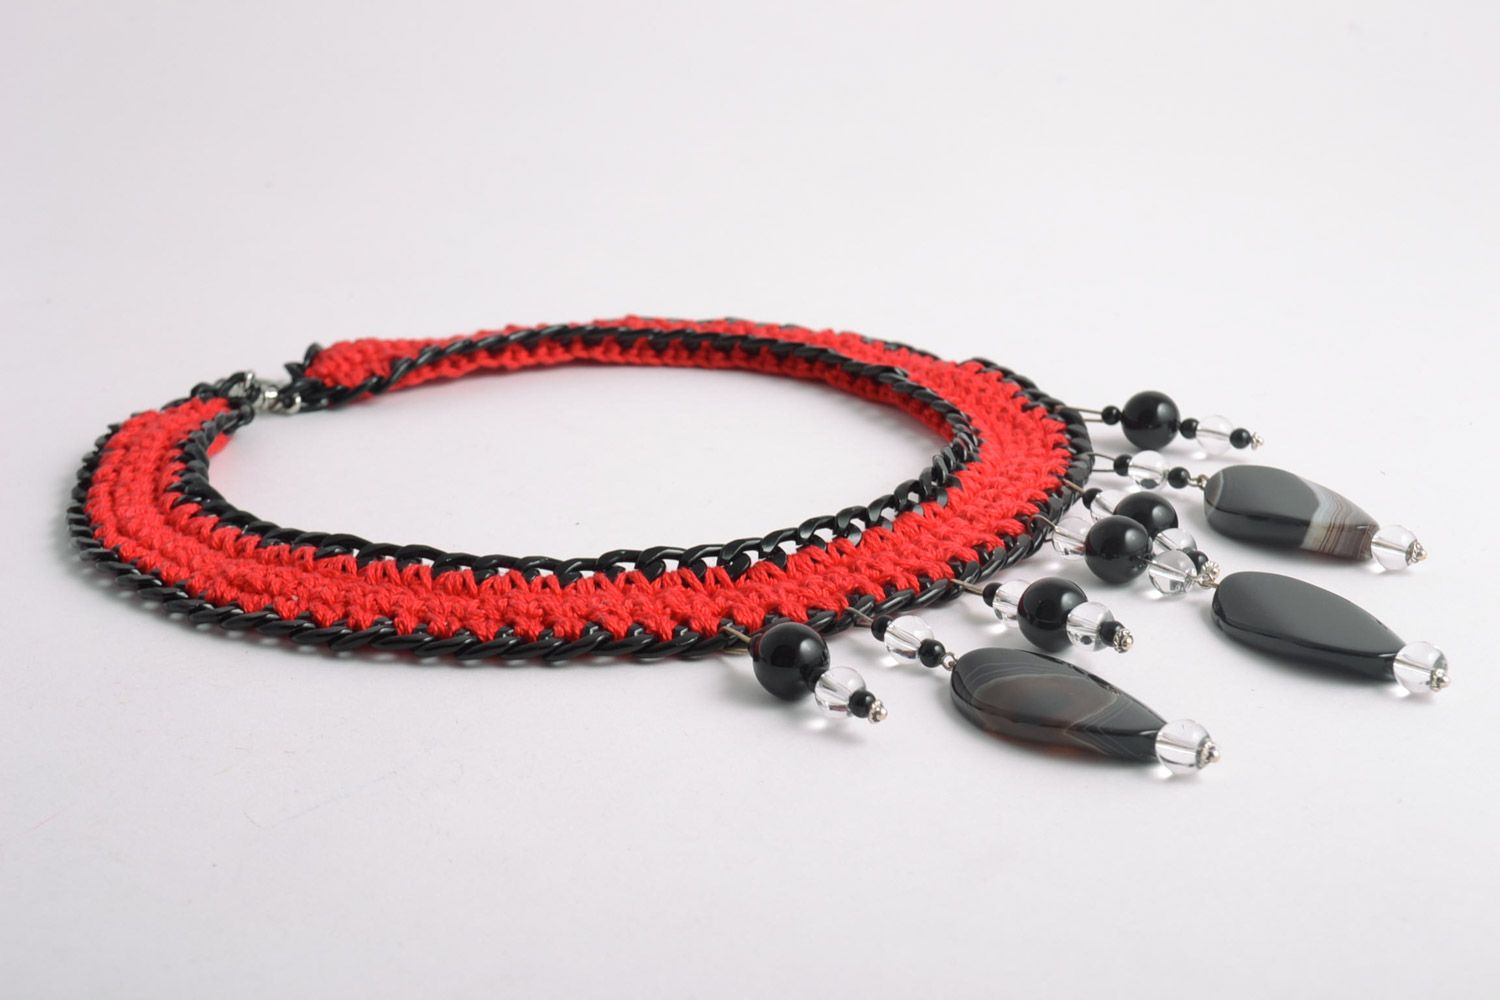 Strict handmade gemstone crochet necklace of red and black colors photo 5